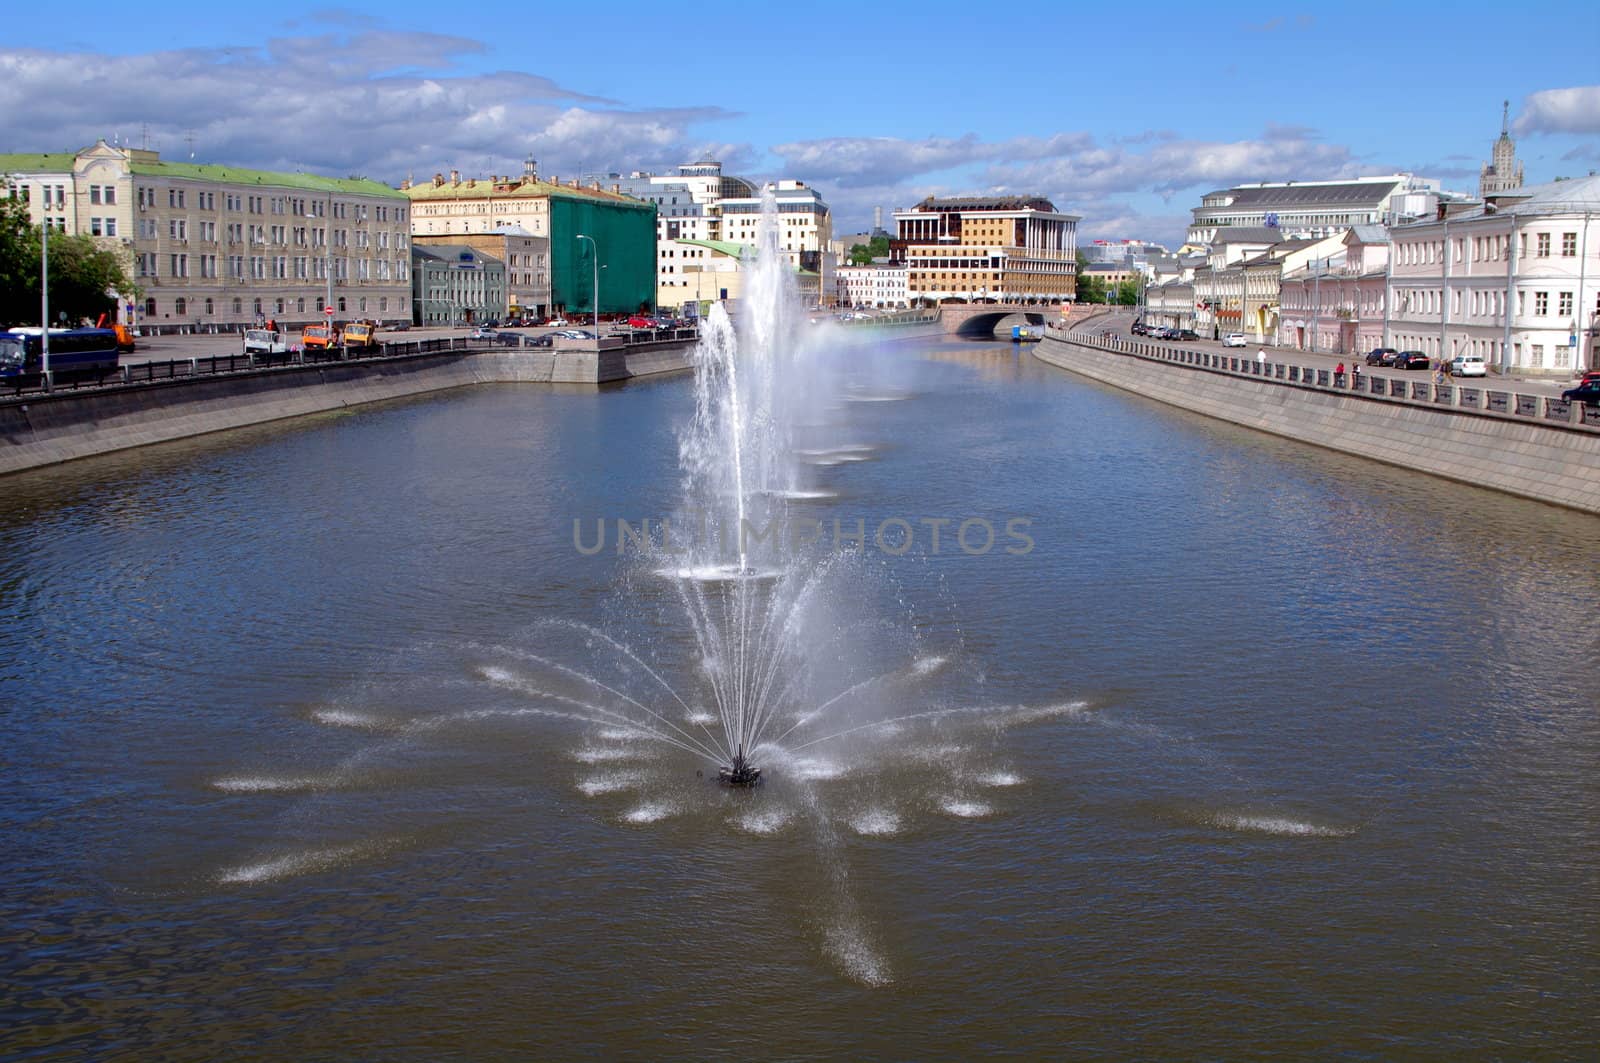 Fountains in obvodnii chanel, Moscow, Russia by Stoyanov